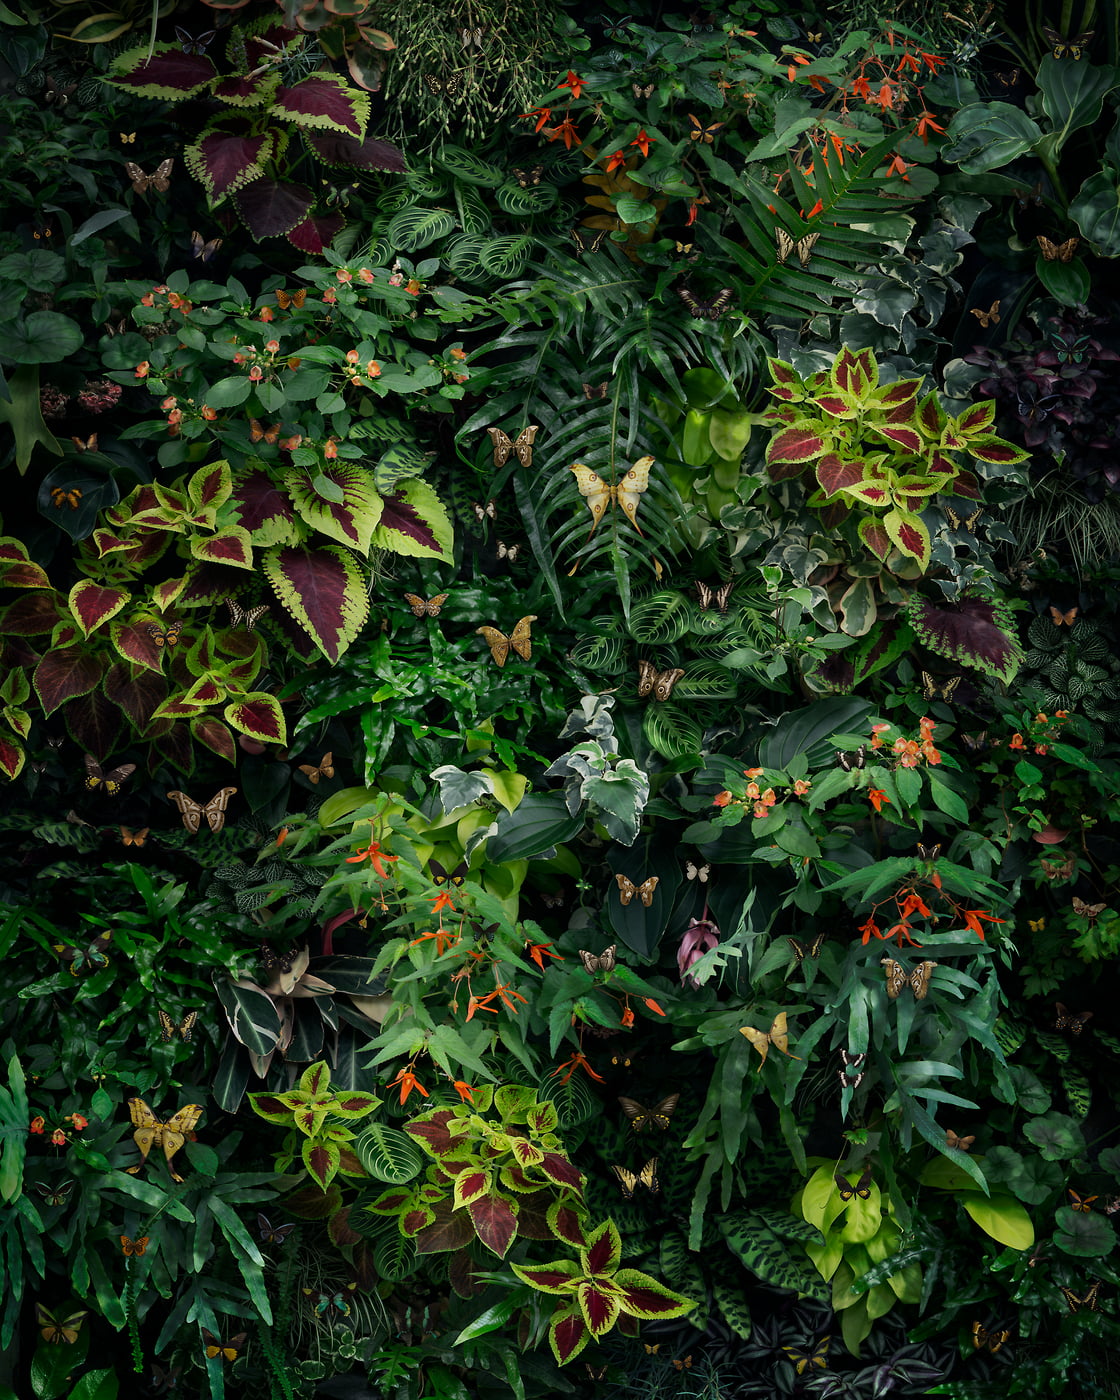 180 megapixels! A very high resolution, large-format VAST photo print of plants covering the ground; photograph created by Nick Pedersen.